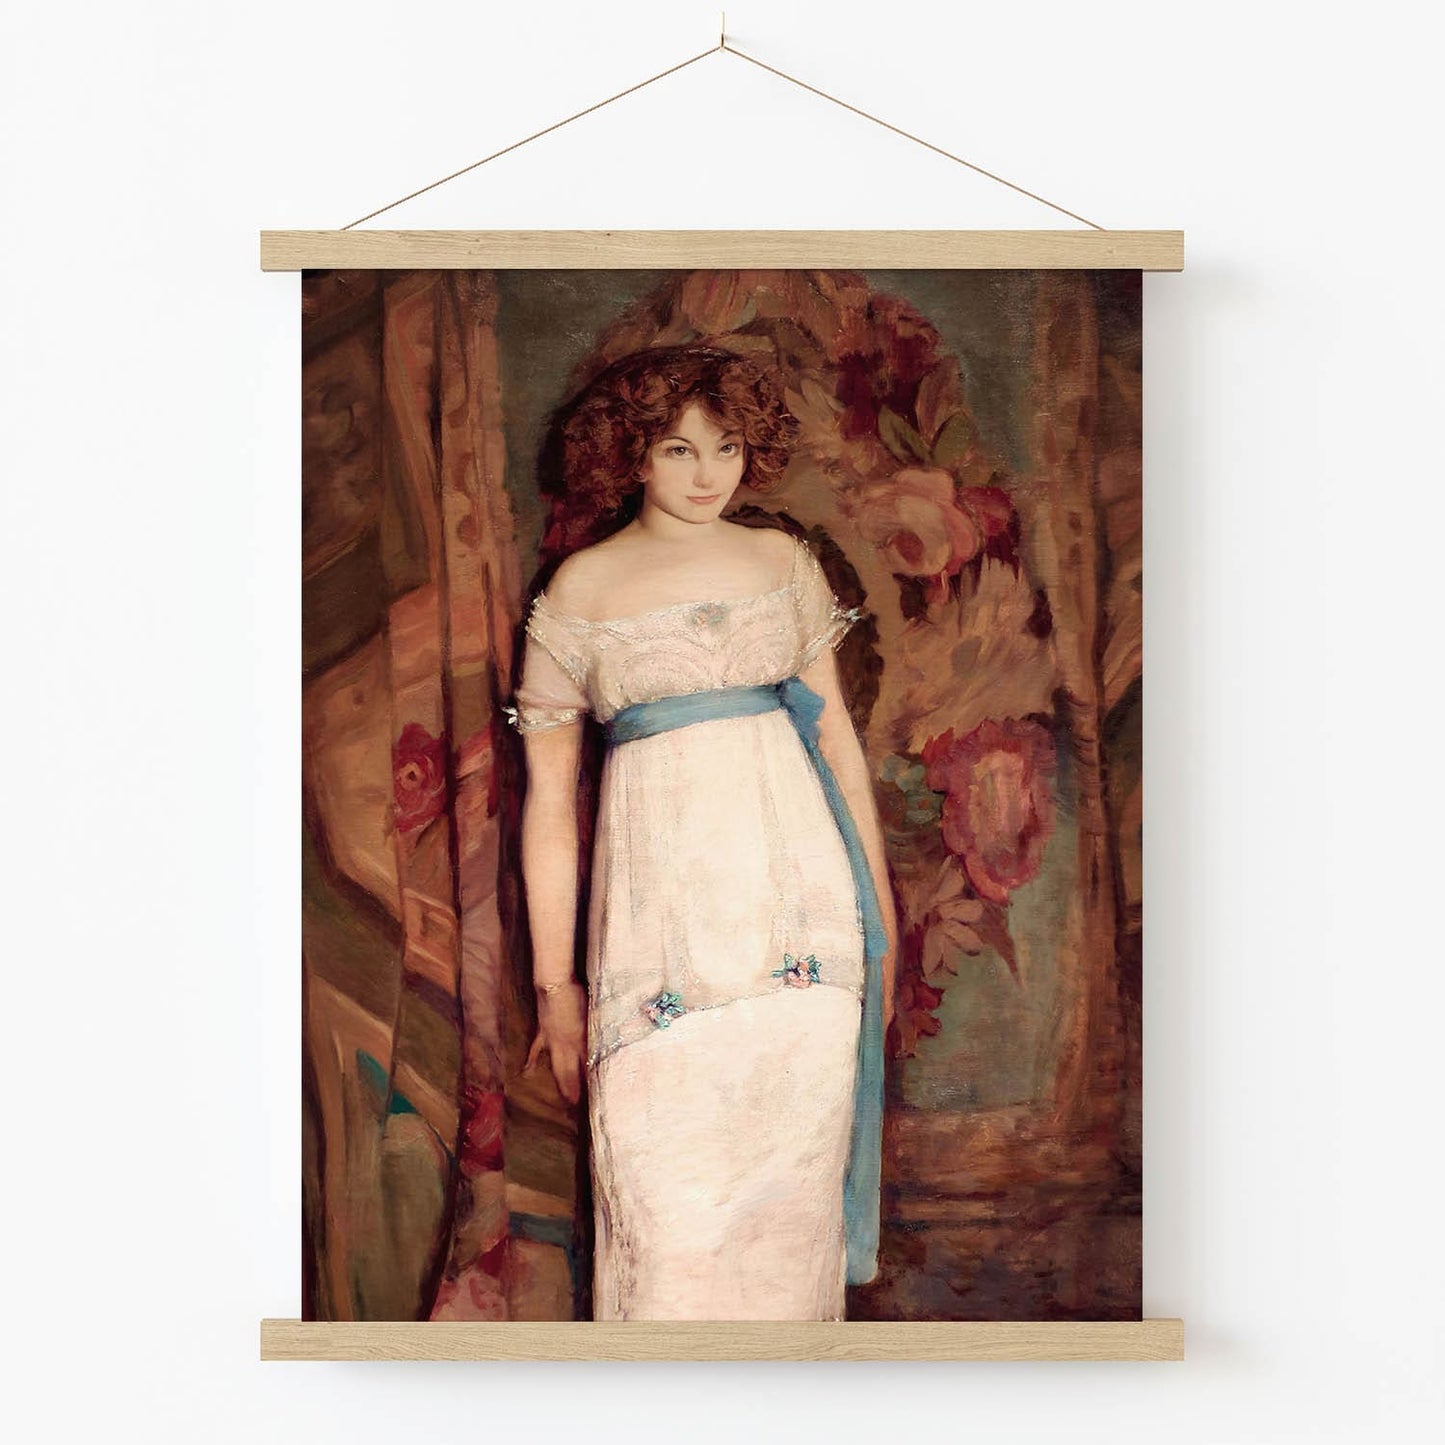 Curly Red Hair Portrait Art Print in Wood Hanger Frame on Wall